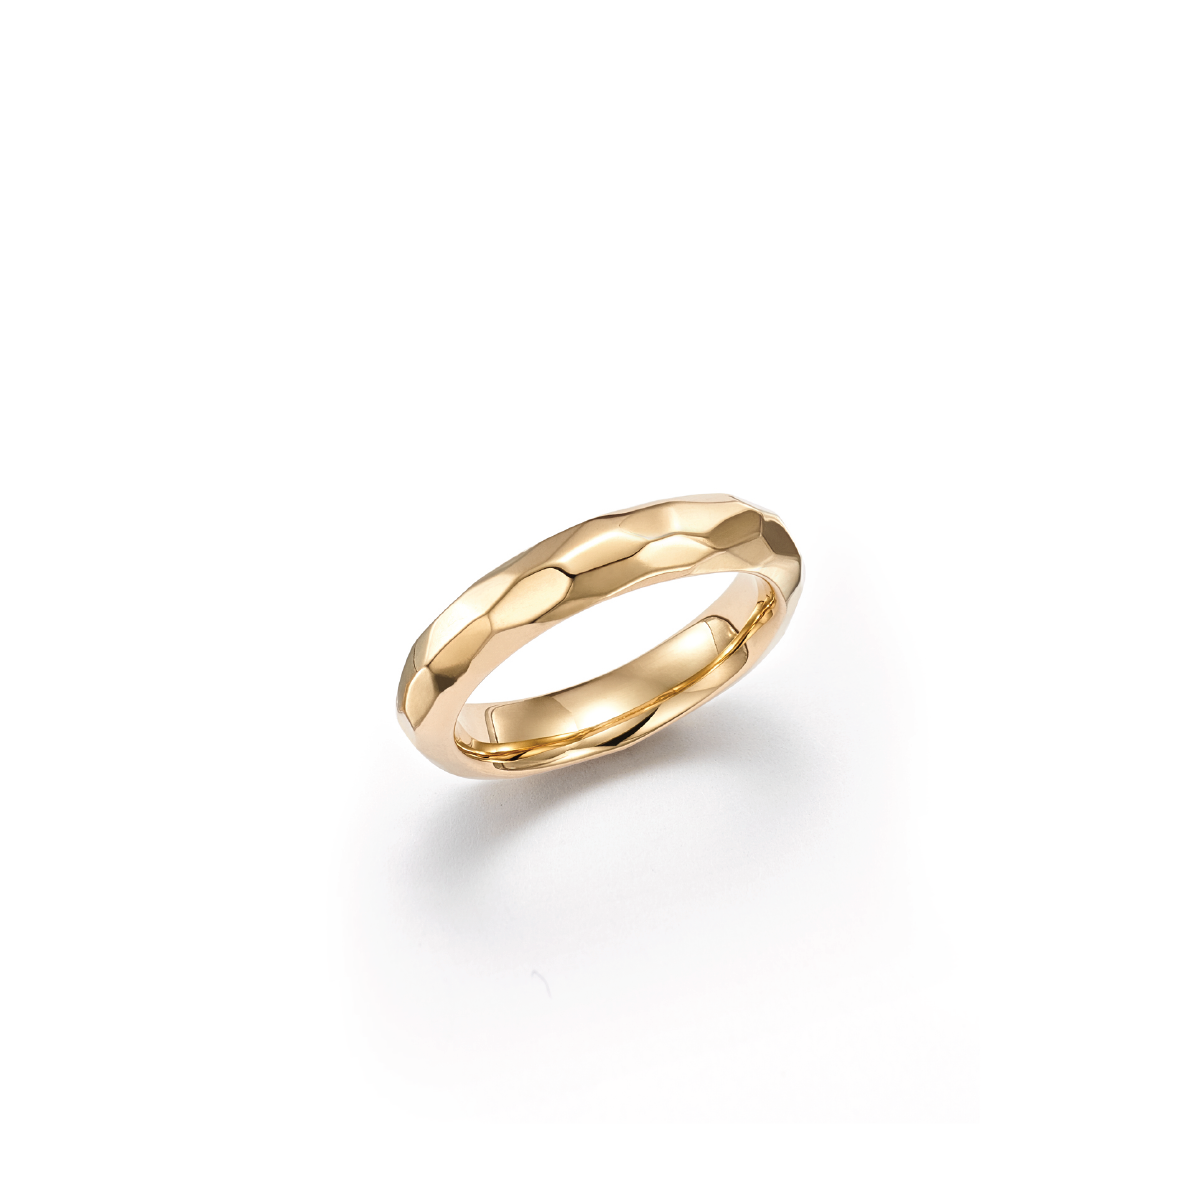 18kt Certified Ecological Gold Wedding Ring / Wedding Band- Full View